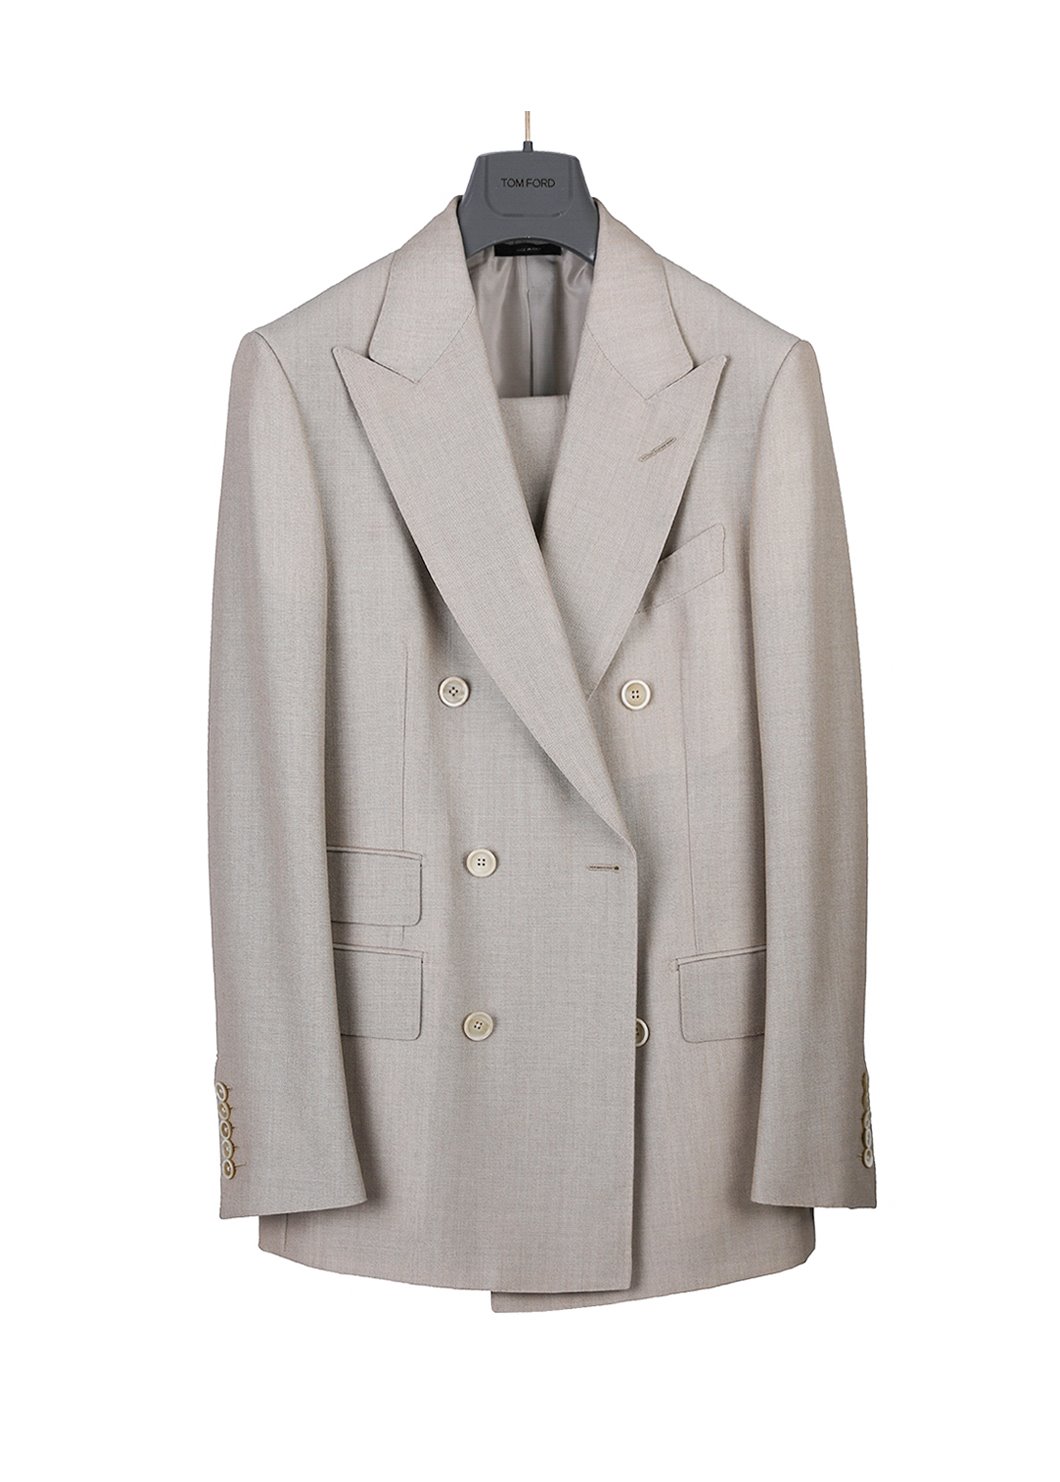 TOMFORD Shelton Double Breasted Beige Suit